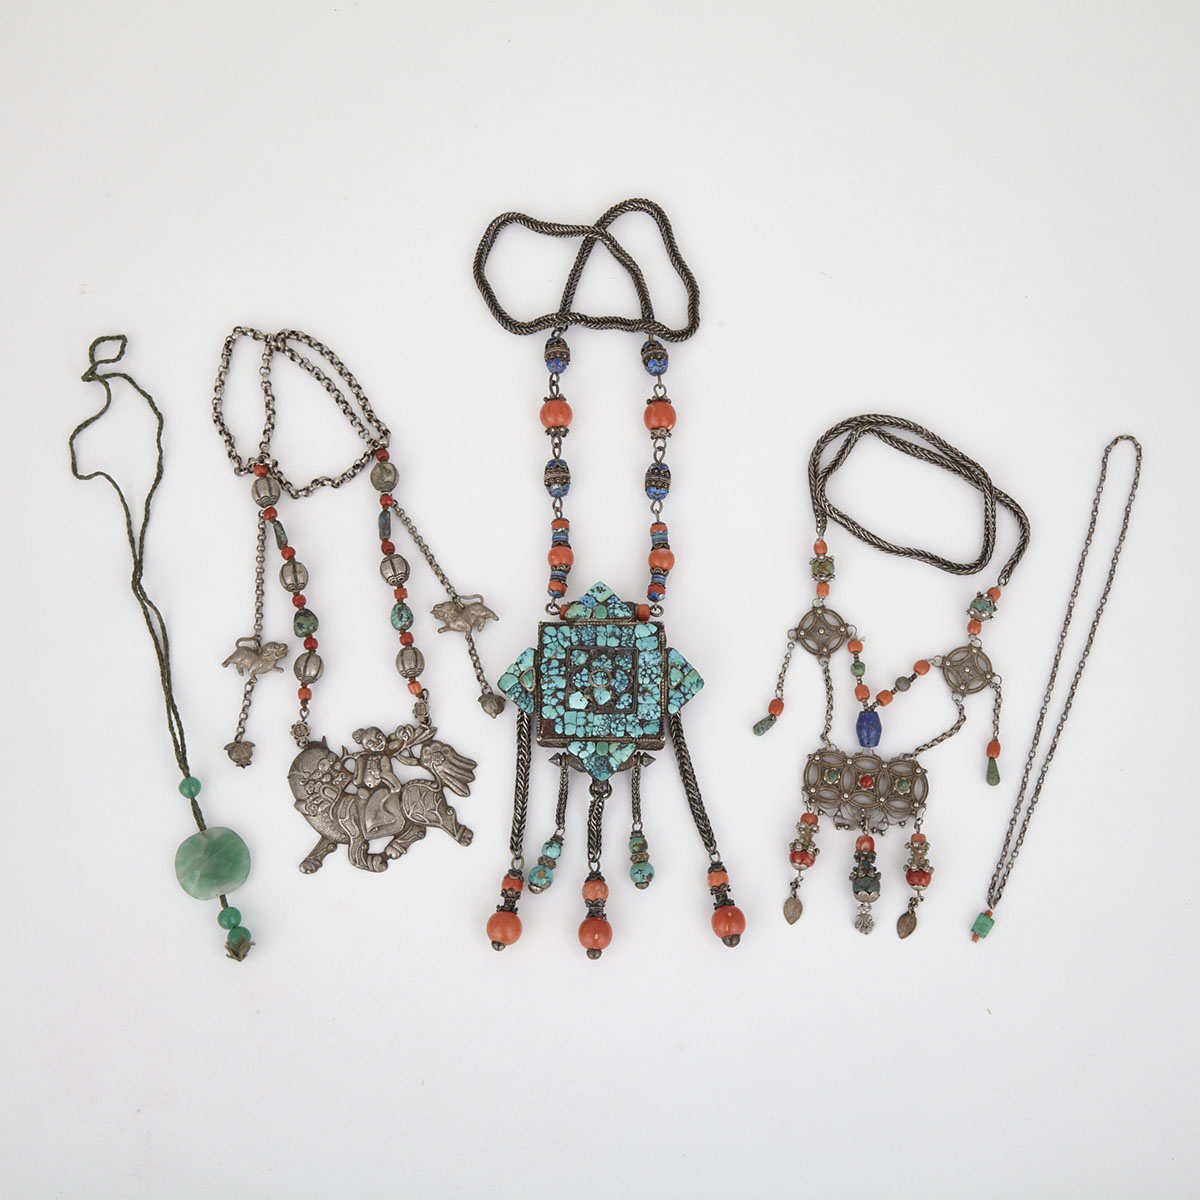 Group of Five Tibetan Necklaces, Early 20th Century